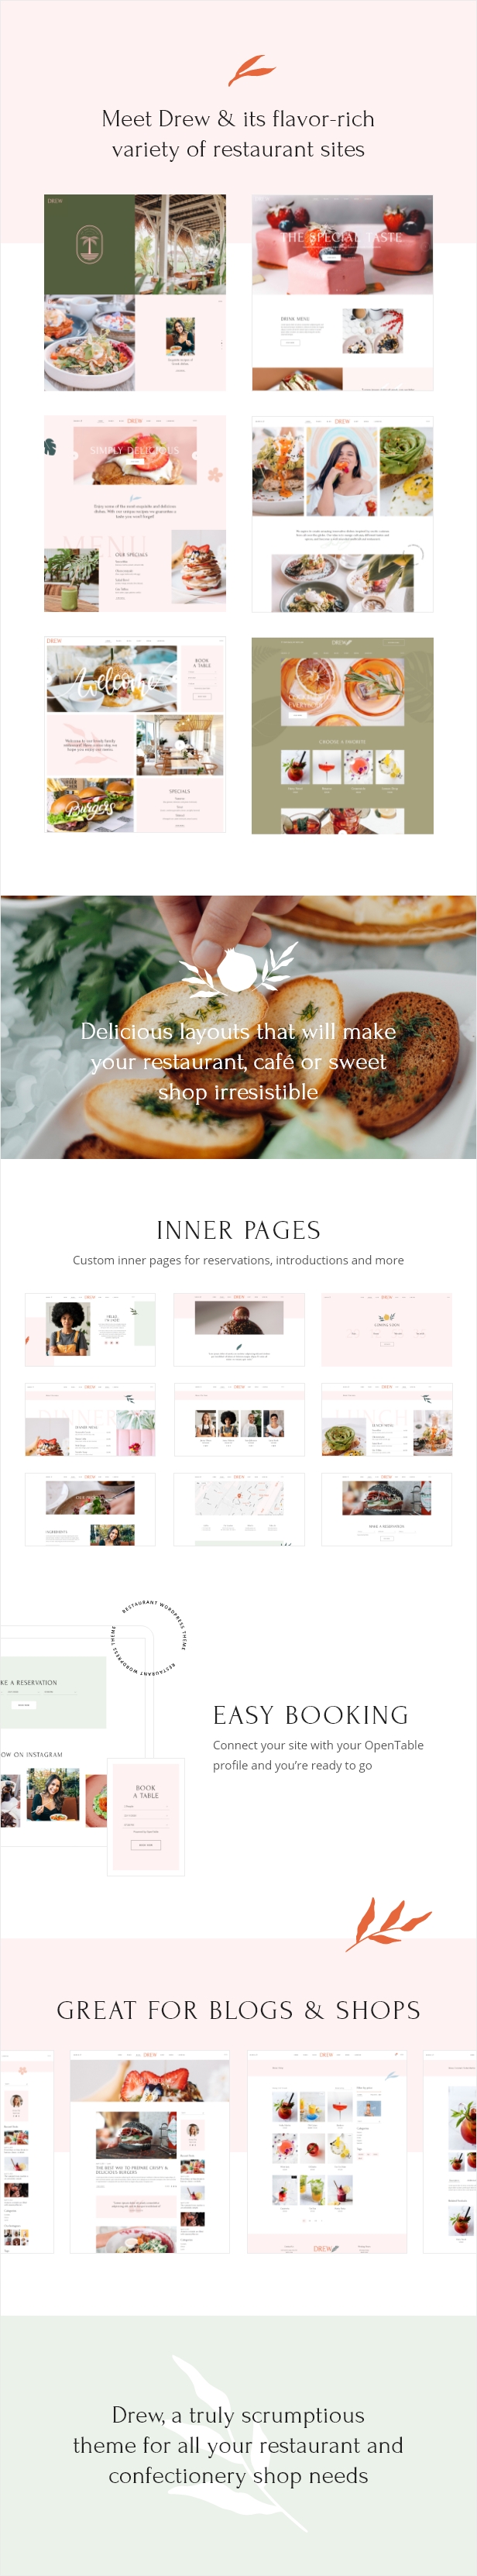 A selection of elegant restaurant theme WordPress pages.